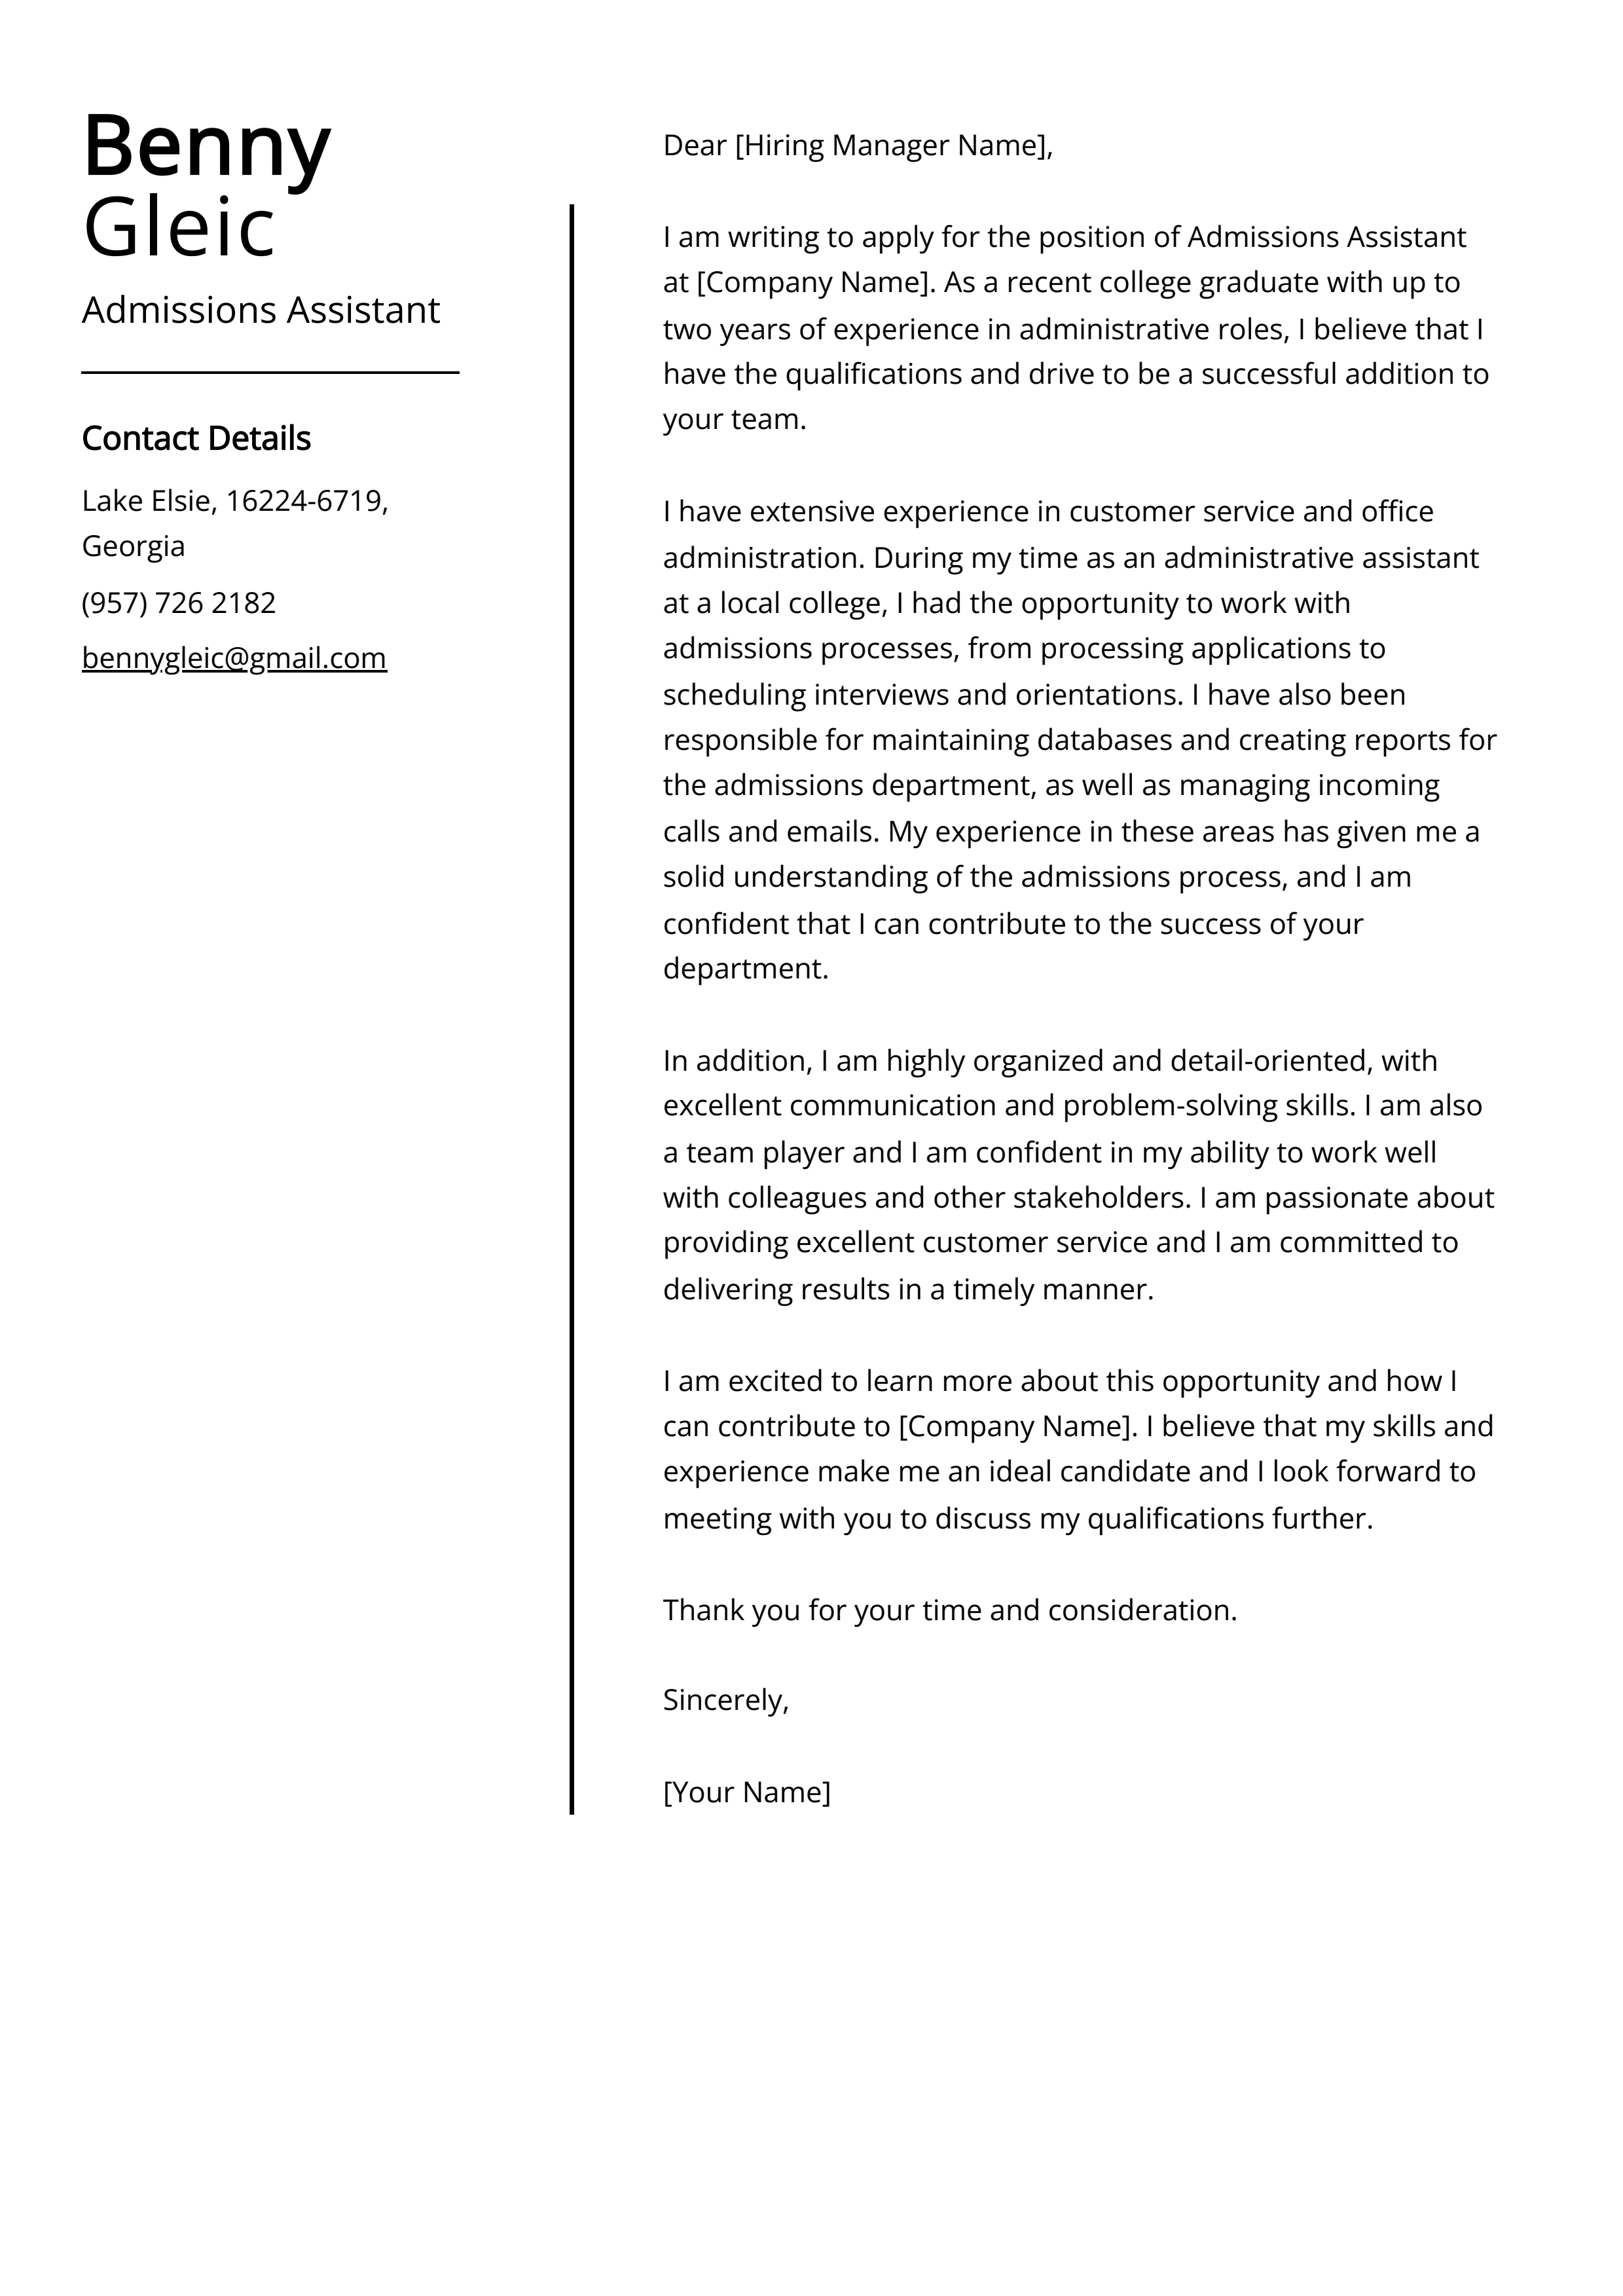 Admissions Assistant Cover Letter Example